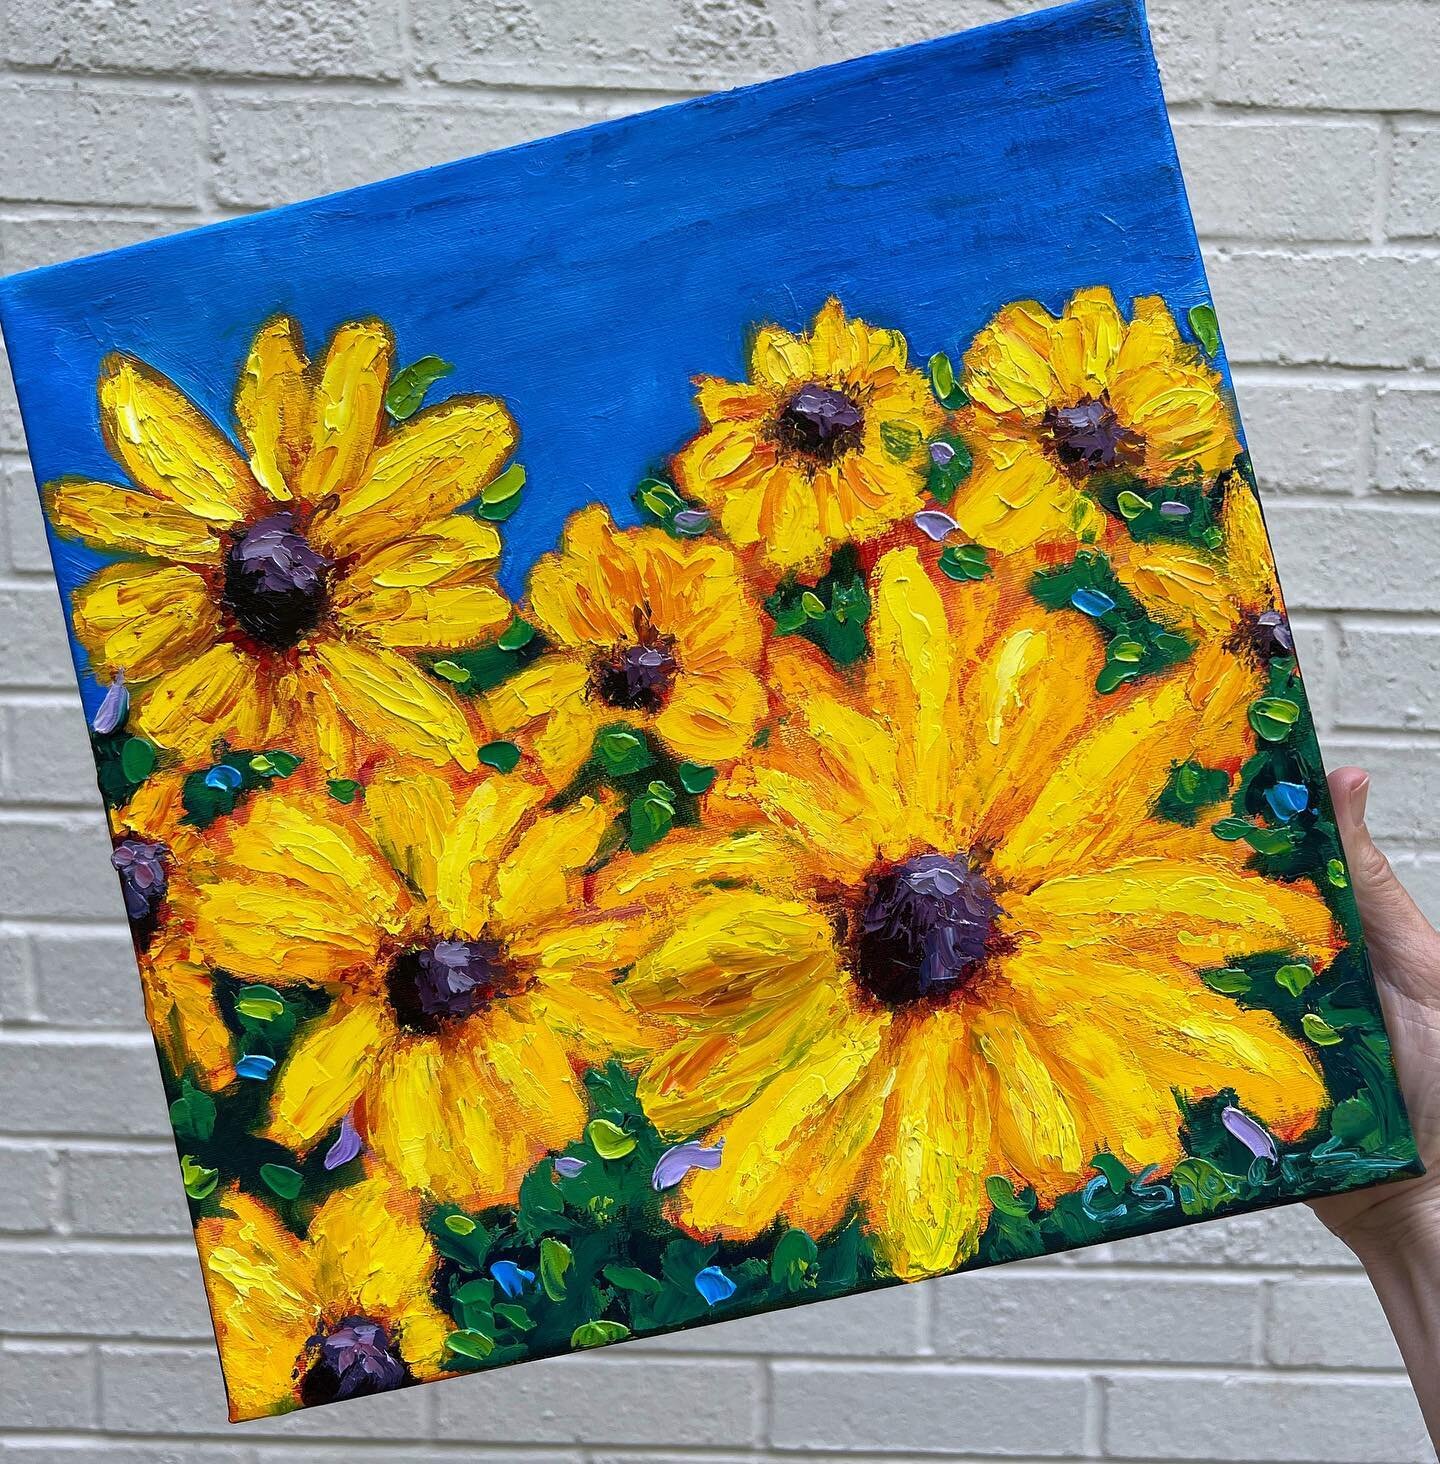 Such a fun commission!🌻 Sending this painting to its new home in Richmond!
✨
Sunflowers | 12x12x2&rdquo; | oil on linen | SOLD
-
-
-
-

#oilpainting #sunflowers #flower #flowerart #sunflowerpainting  #charlottesvilleart #cvilleartists #cvilleart #cv